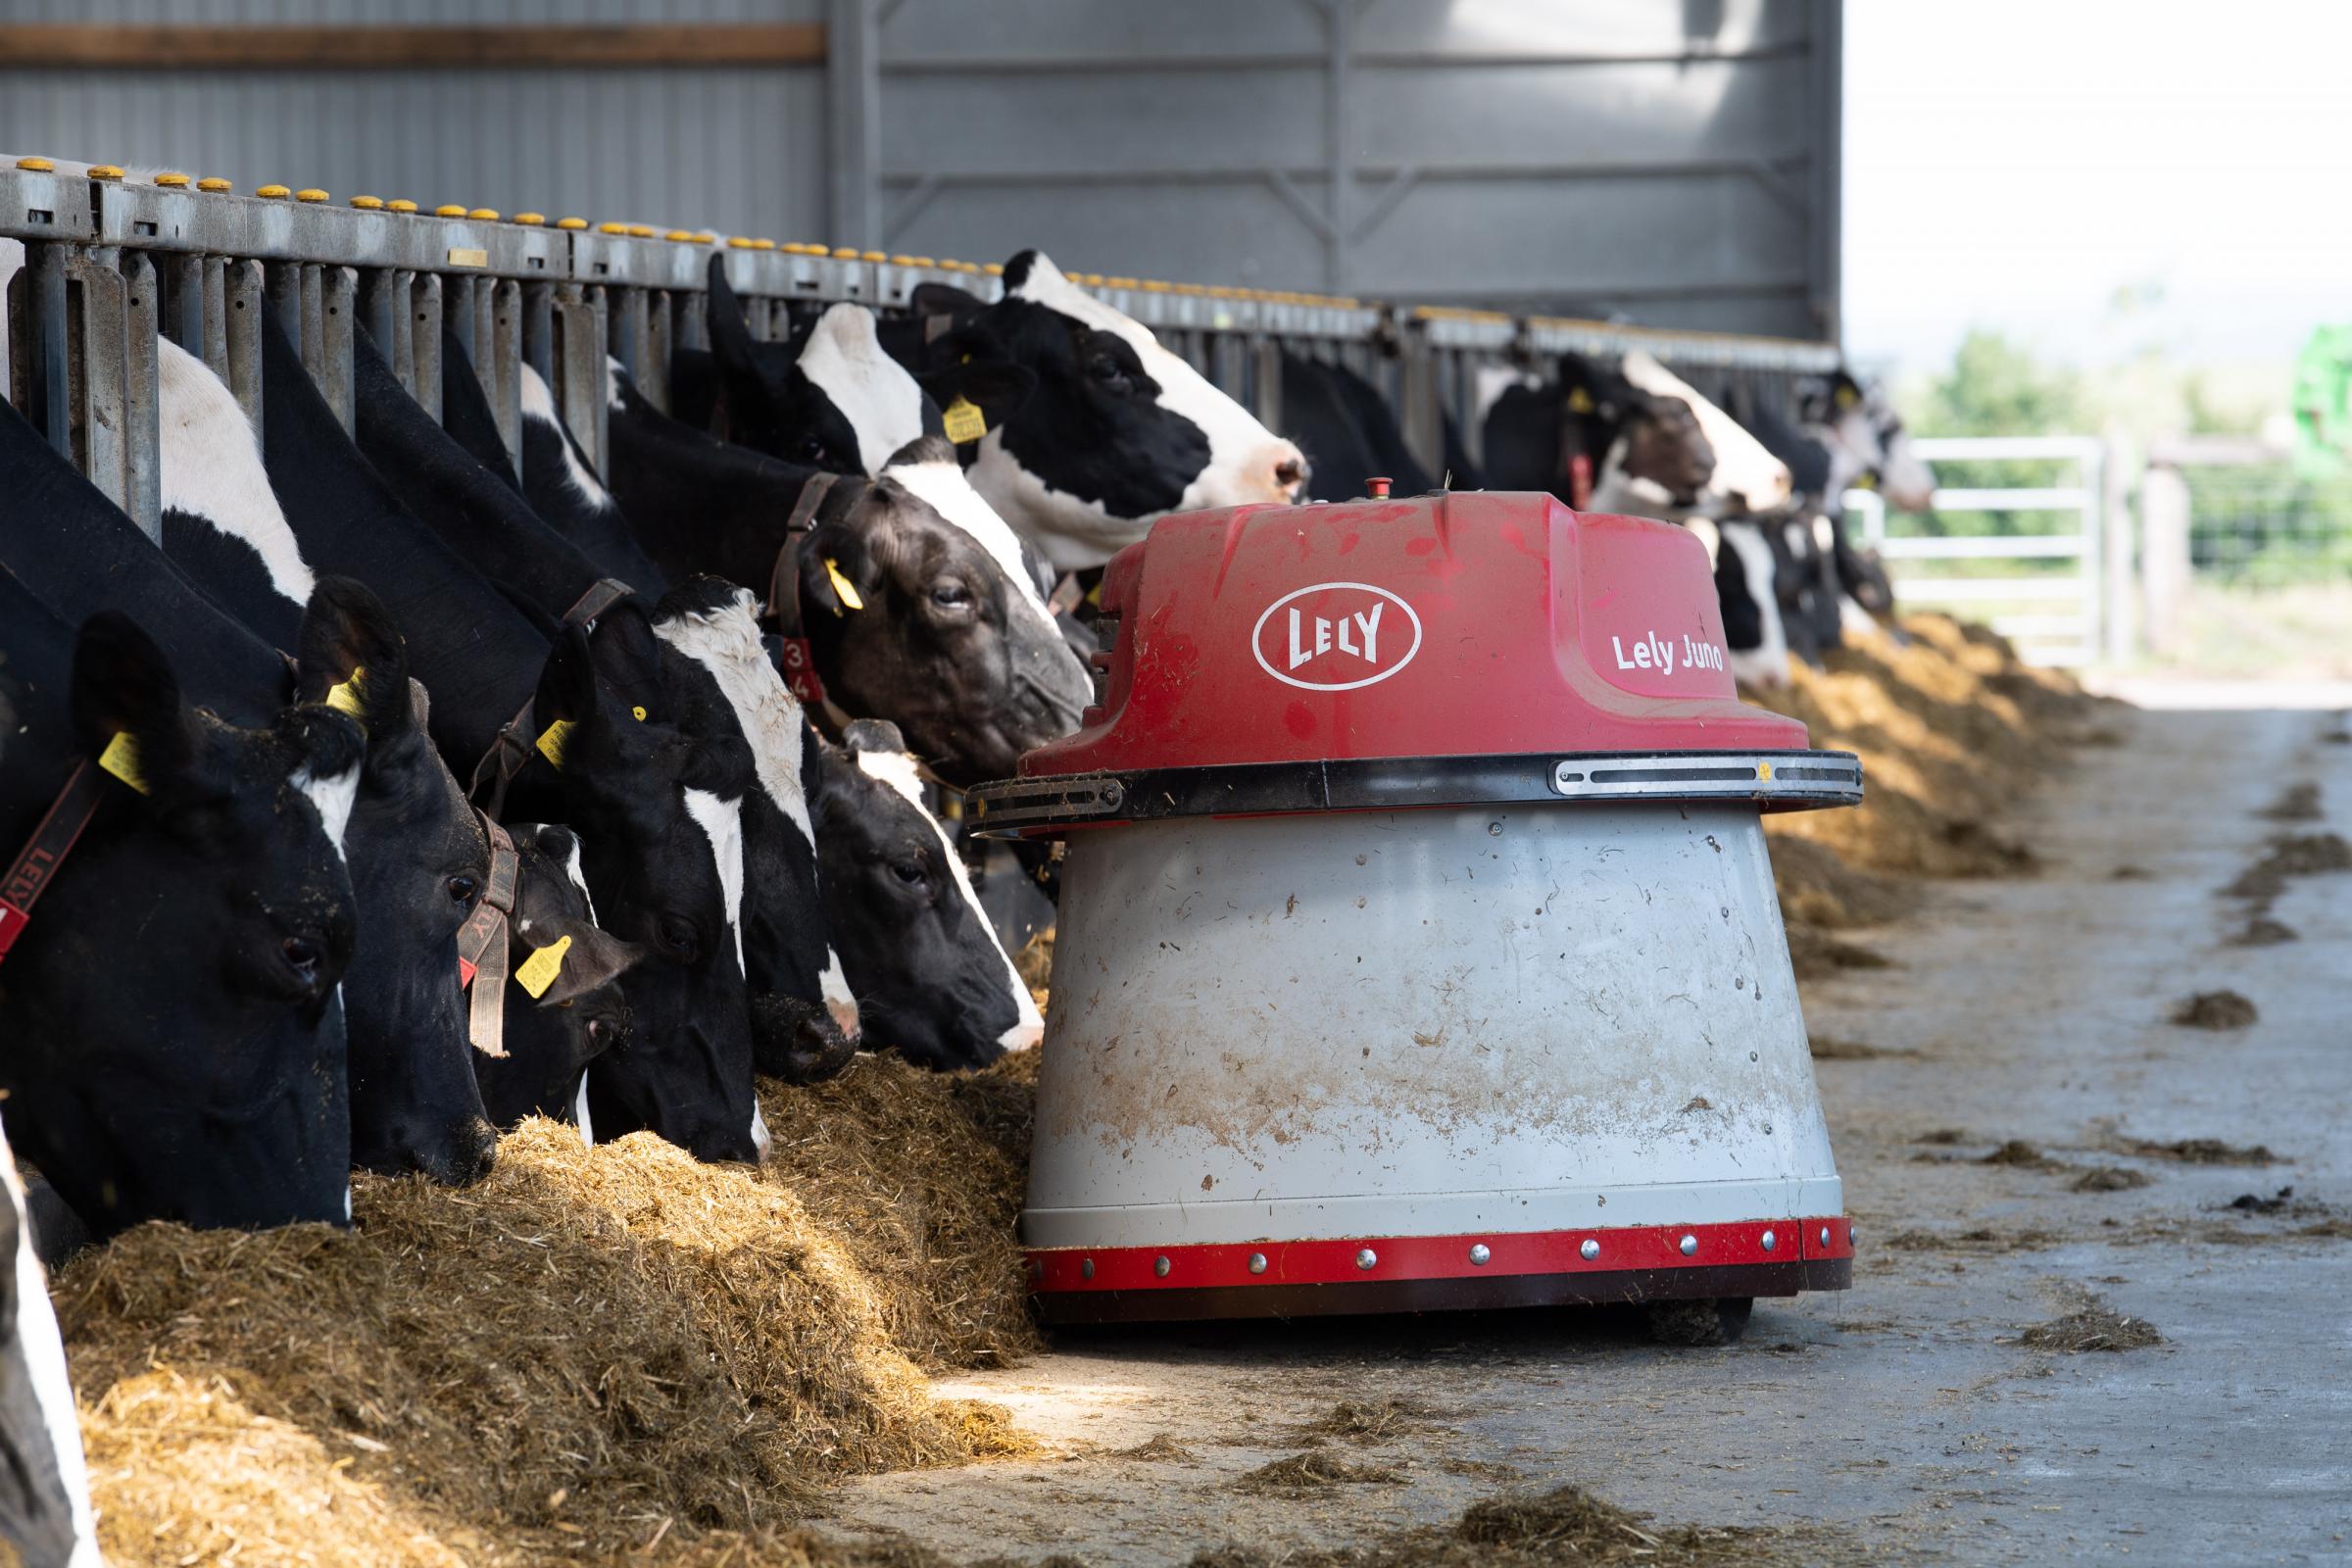  Lely Juno, Automated feed pushing robot to keep the cows with silage Ref:RH210721031 Rob Haining / The Scottish Farmer...